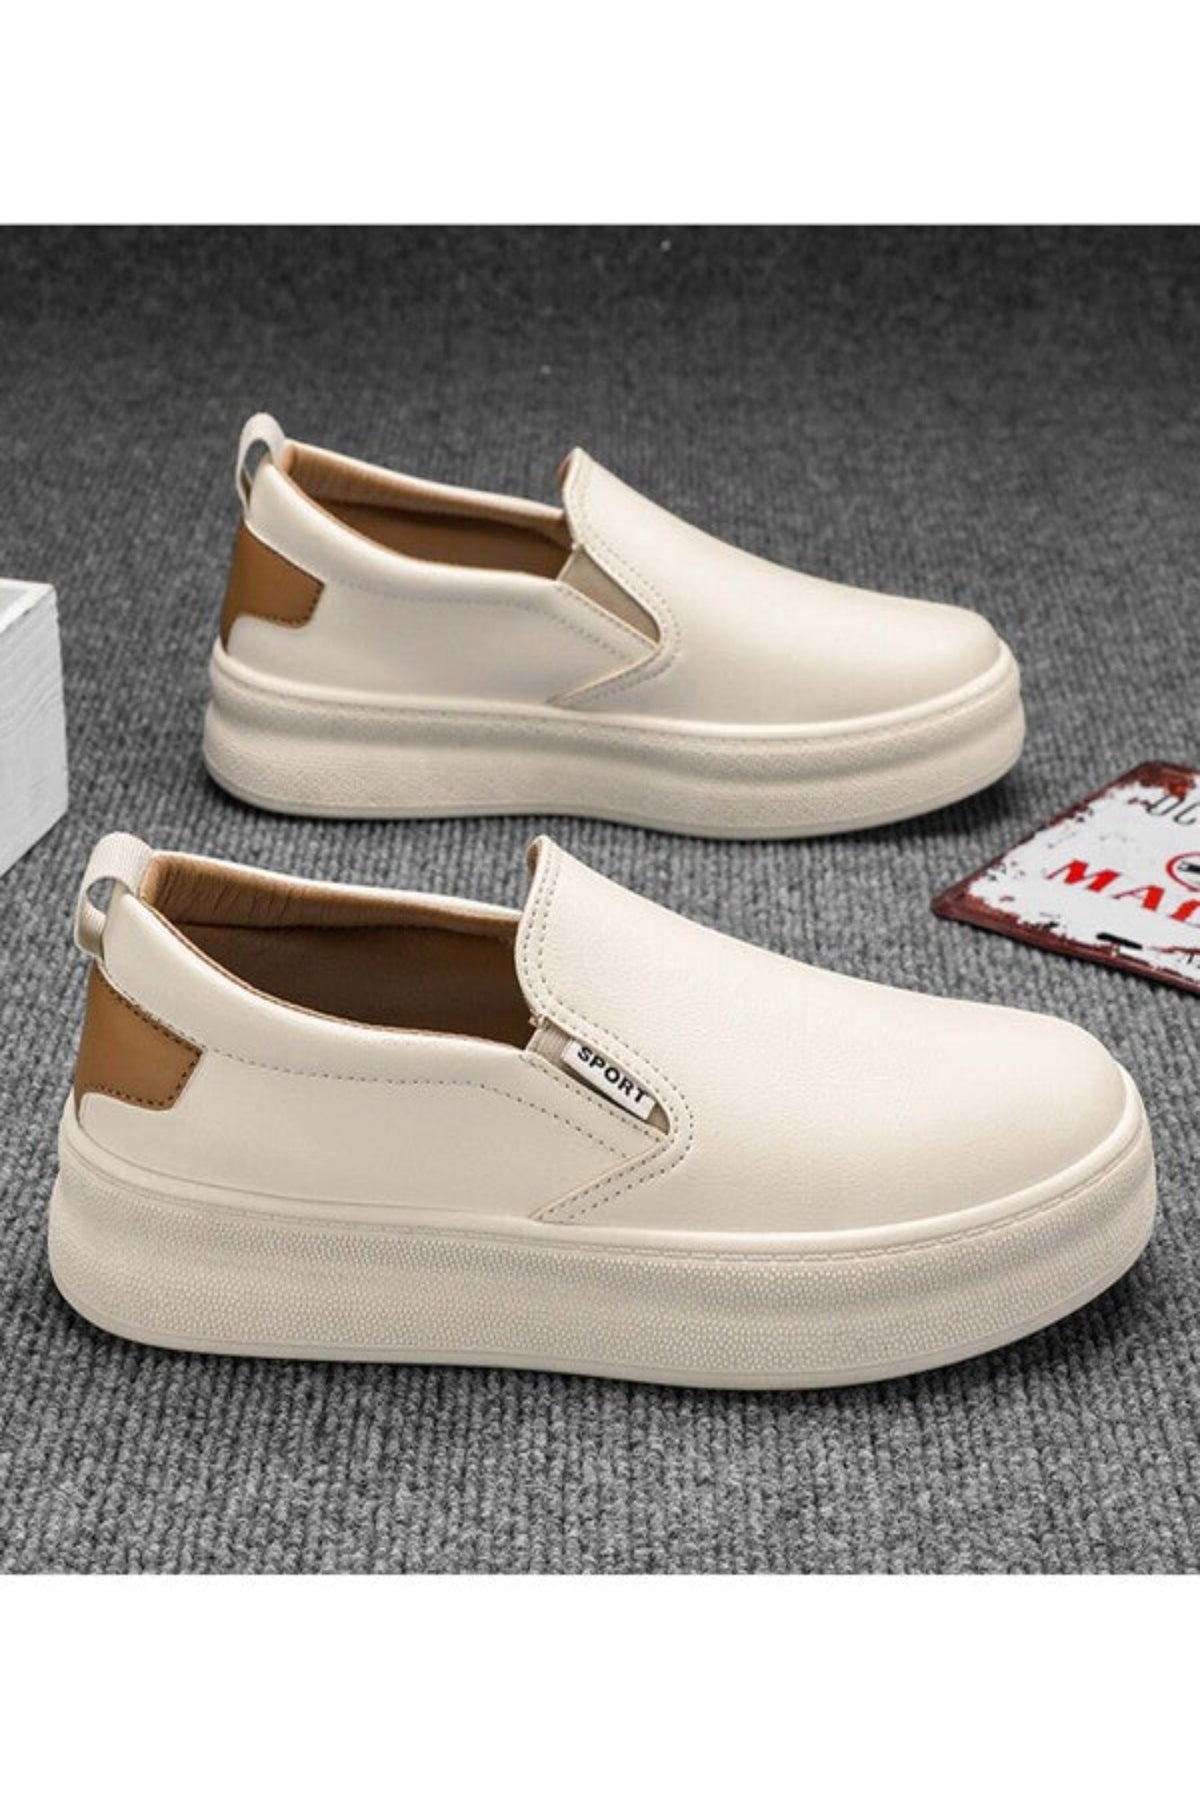 Sporty Sneakers For Men, Letter Graphic Slip On Sneakers